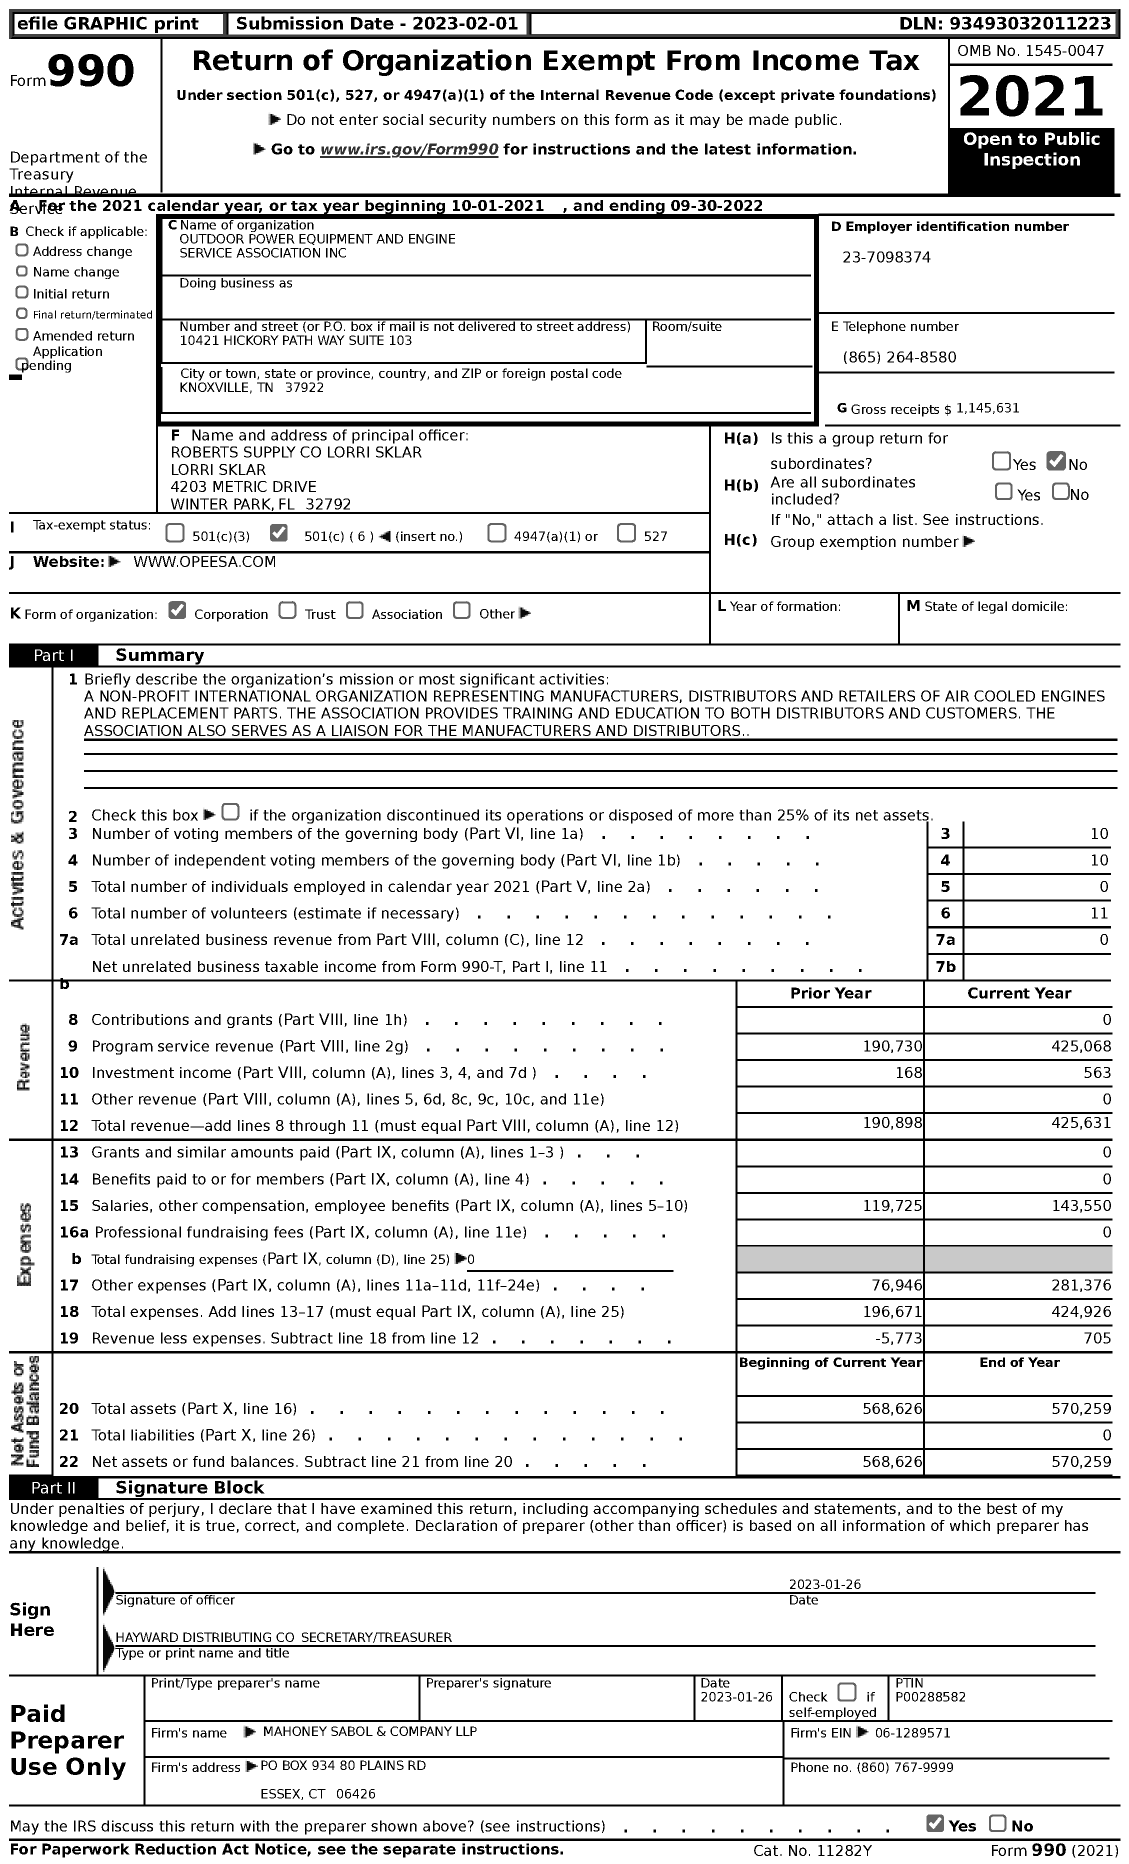 Image of first page of 2021 Form 990 for Outdoor Power Equipment and Engine Service Association